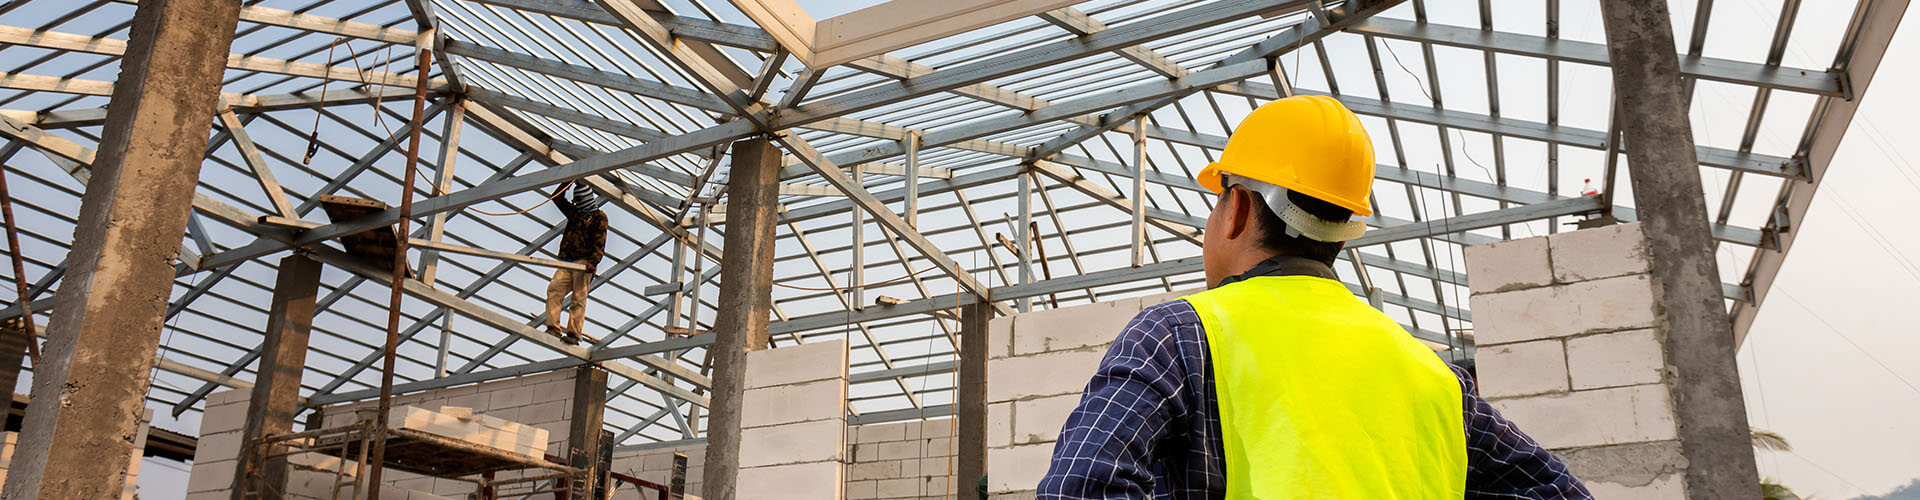 Commercial Construction Loans to Support Your Growth